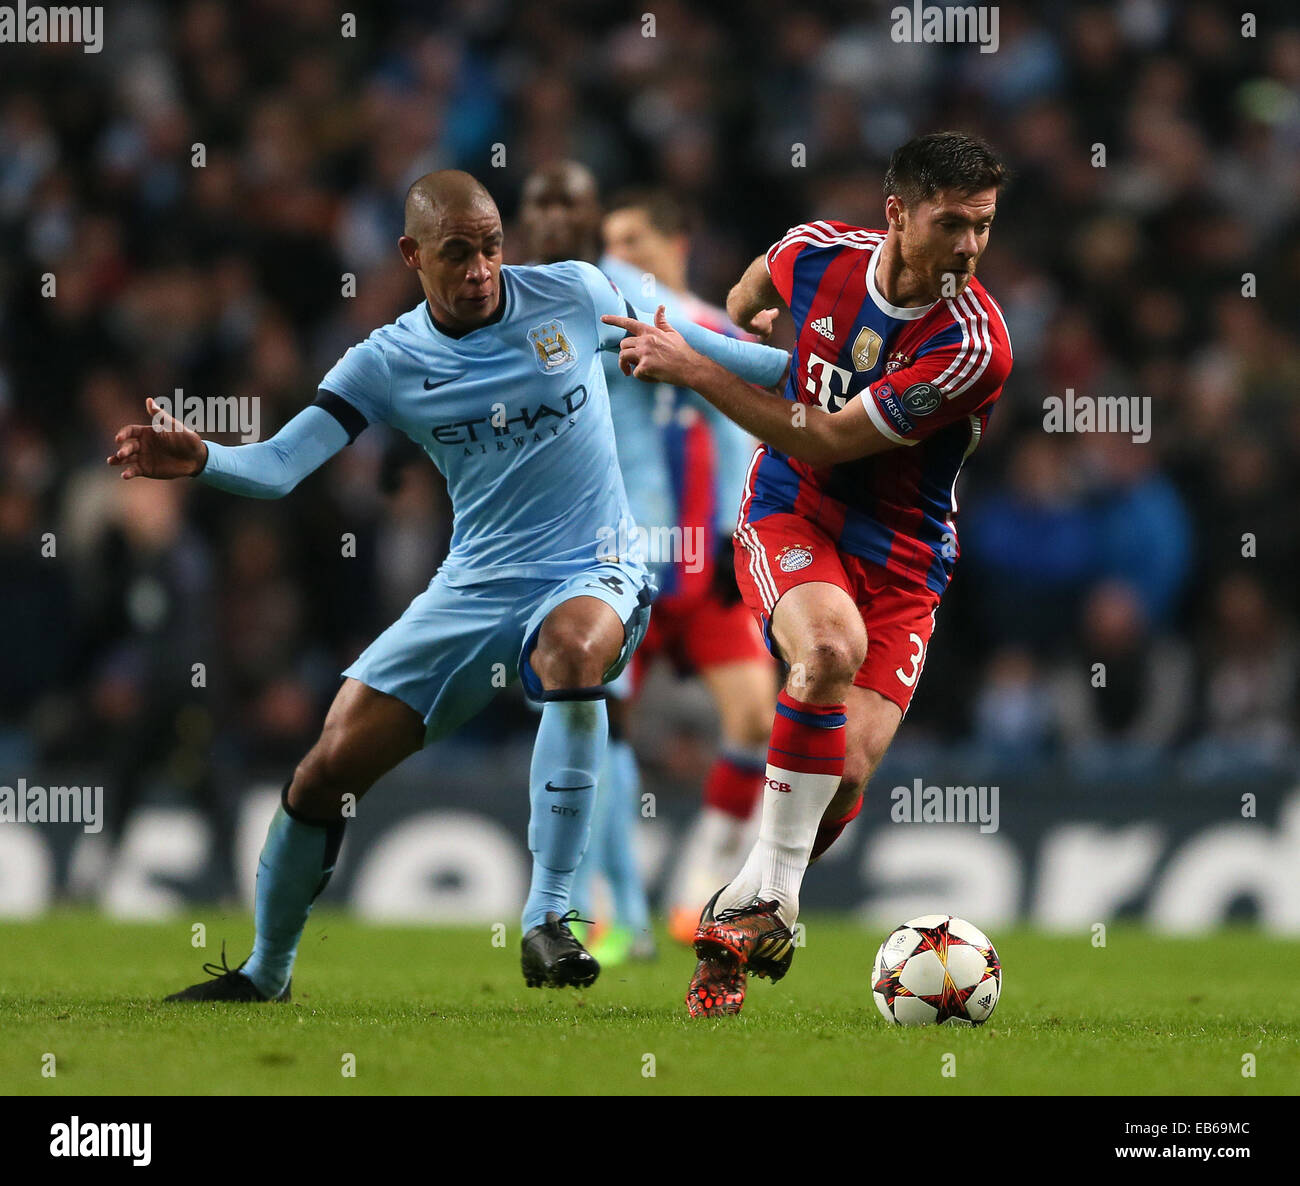 Nov. 25, 2014 - Manchester, United Kingdom - Fernando of Manchester City and Xabi Alonso of Bayern Munich - UEFA Champions League group E - Manchester City vs Bayern Munich - Etihad Stadium - Manchester - England - 25rd November 2014 - Picture Simon Bellis/Sportimage. Stock Photo